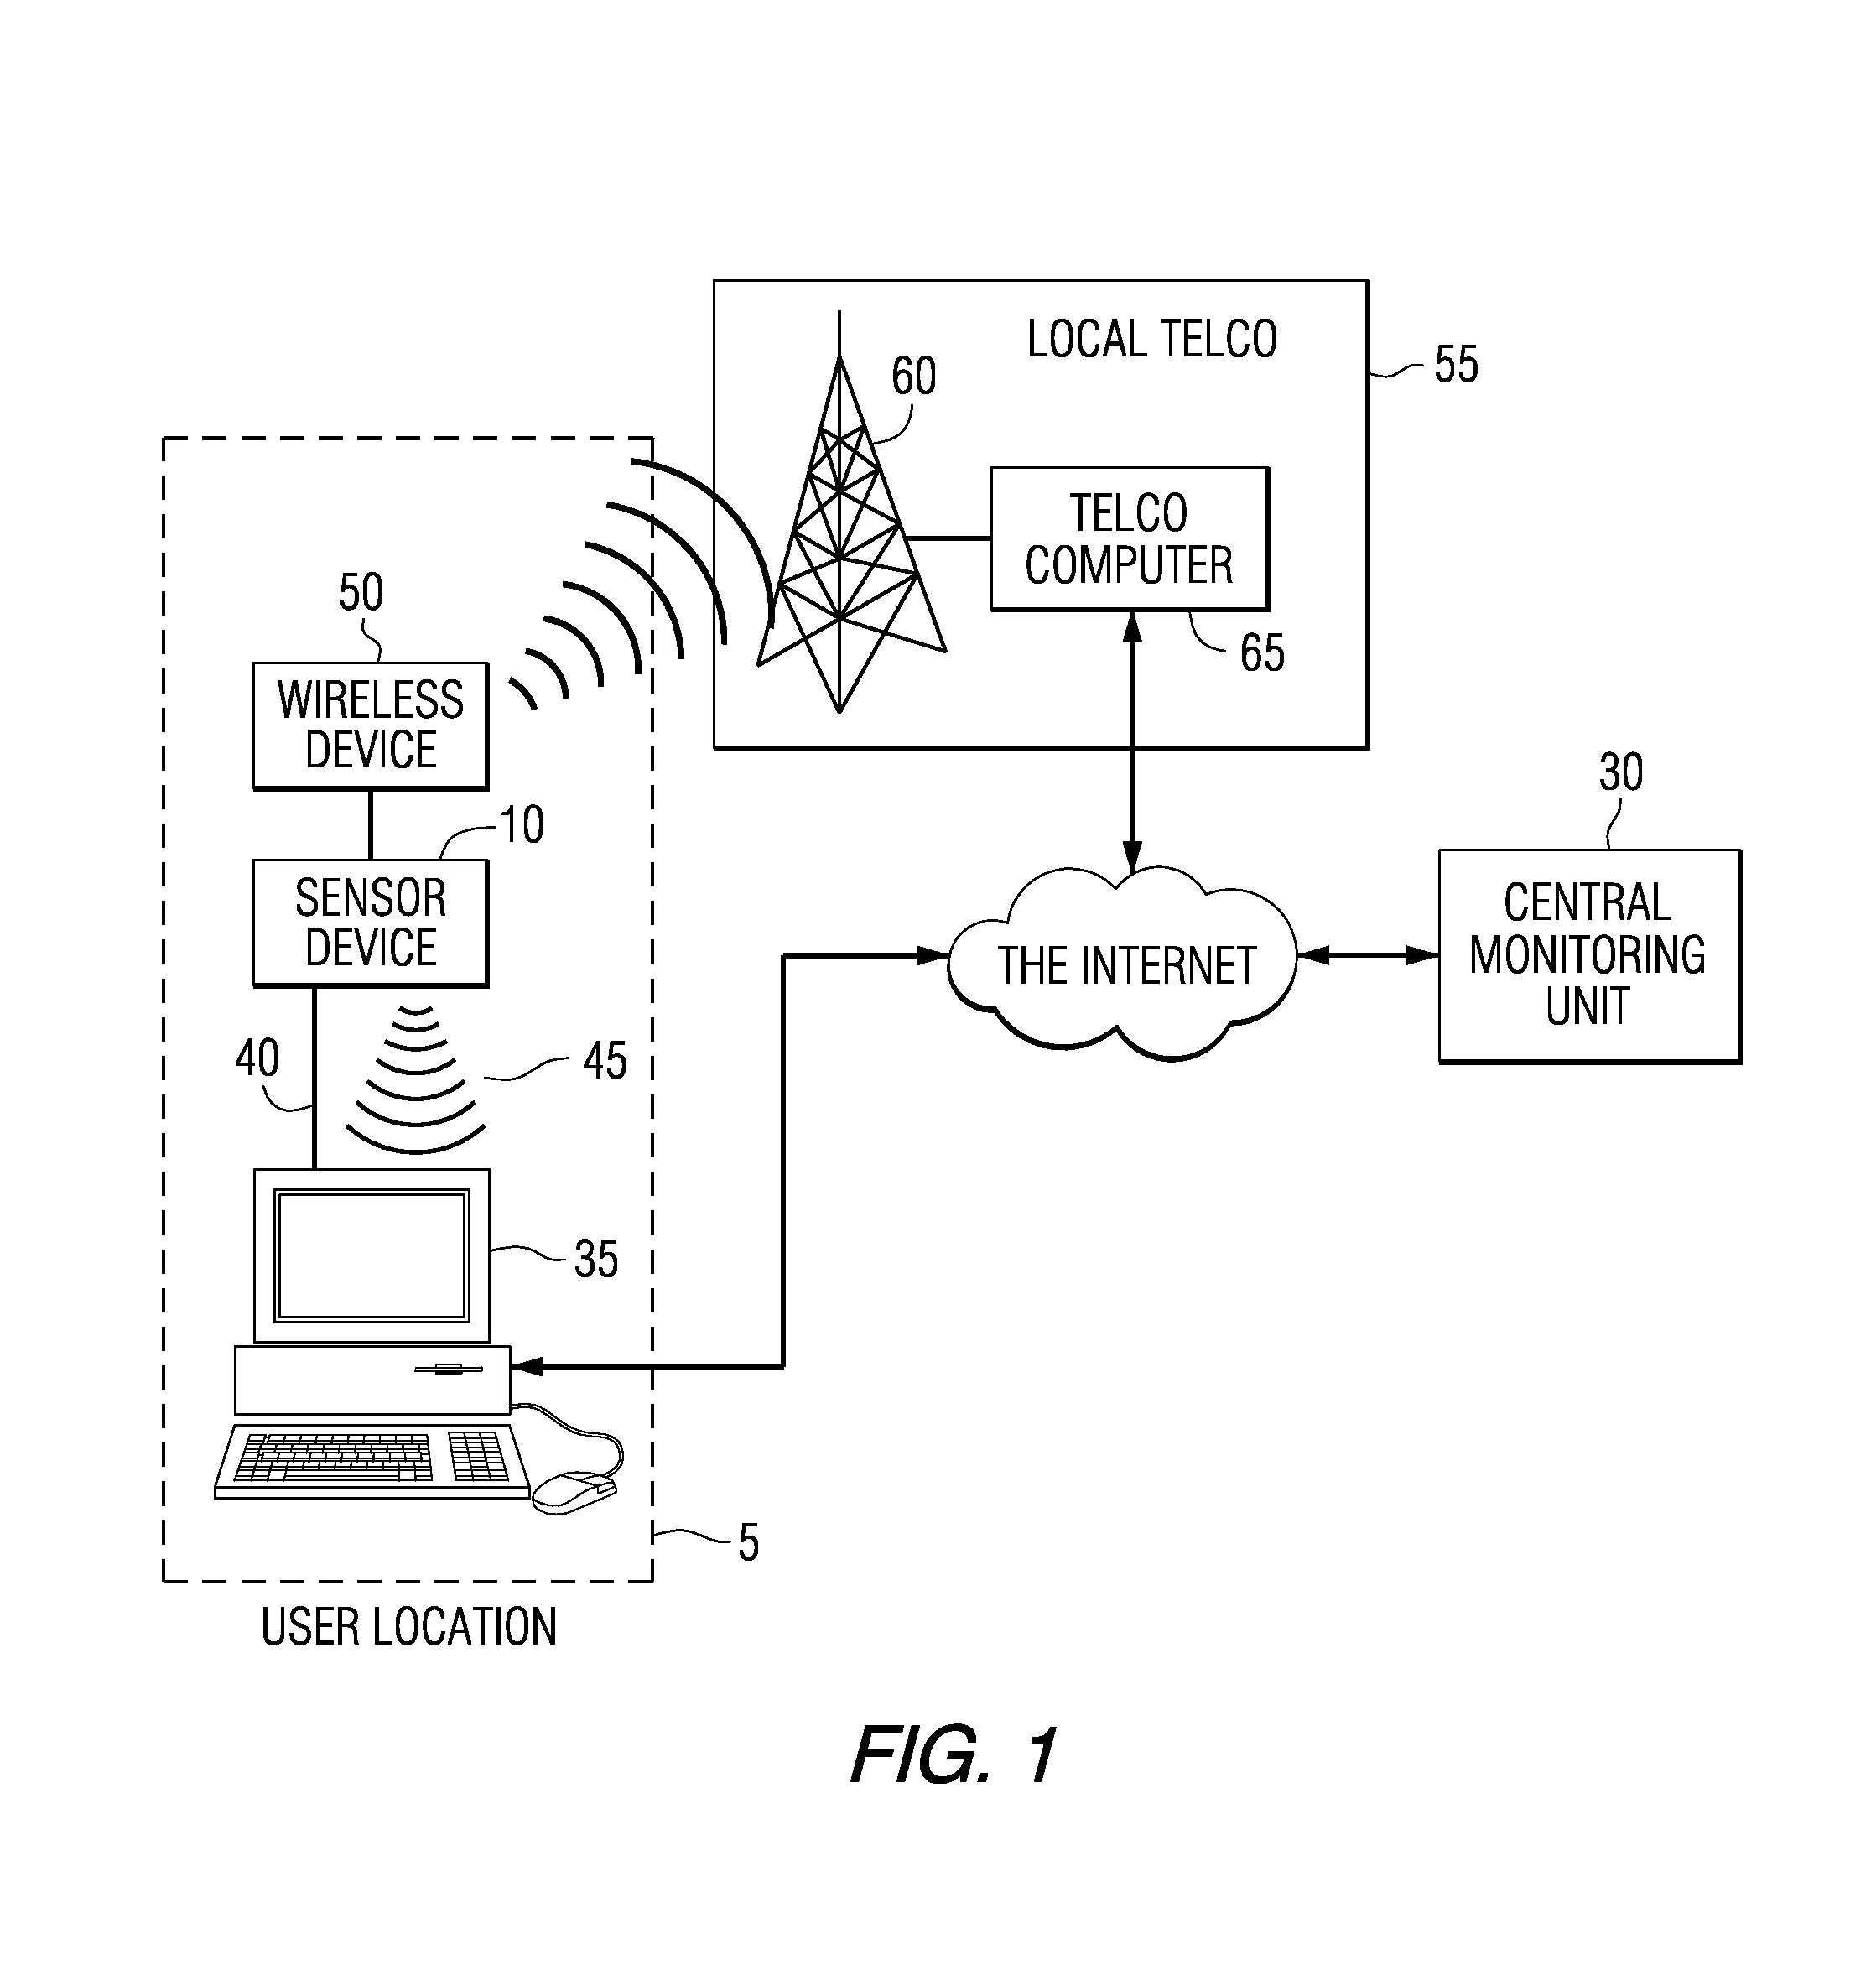 System for monitoring and managing body weight and other physiological conditions including iterative and personalized planning, intervention and reporting capability